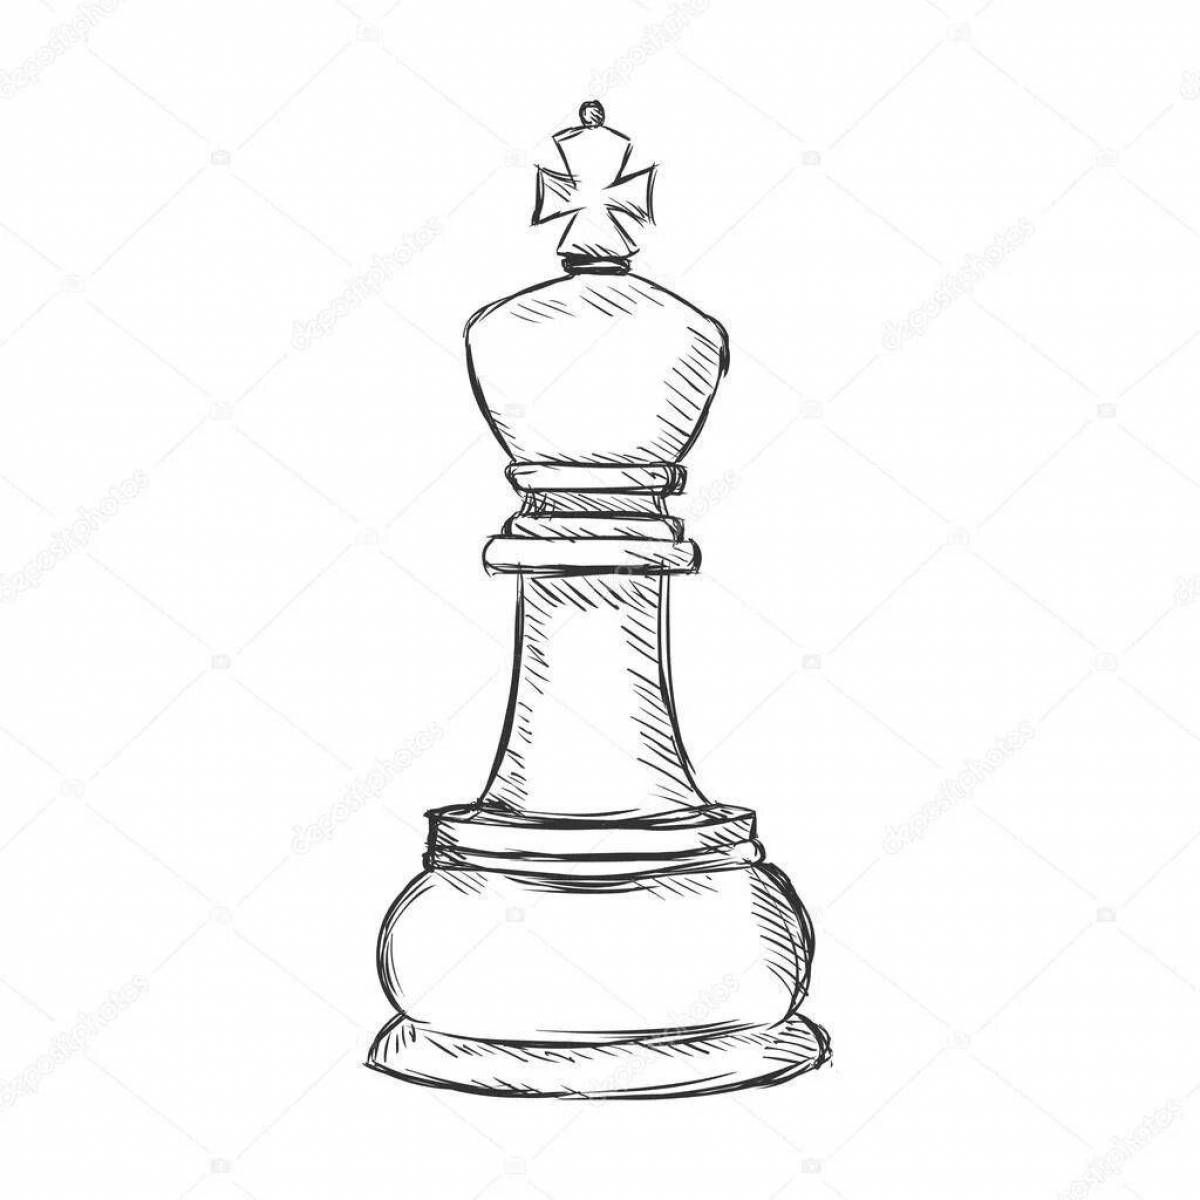 Impressive chess king coloring page